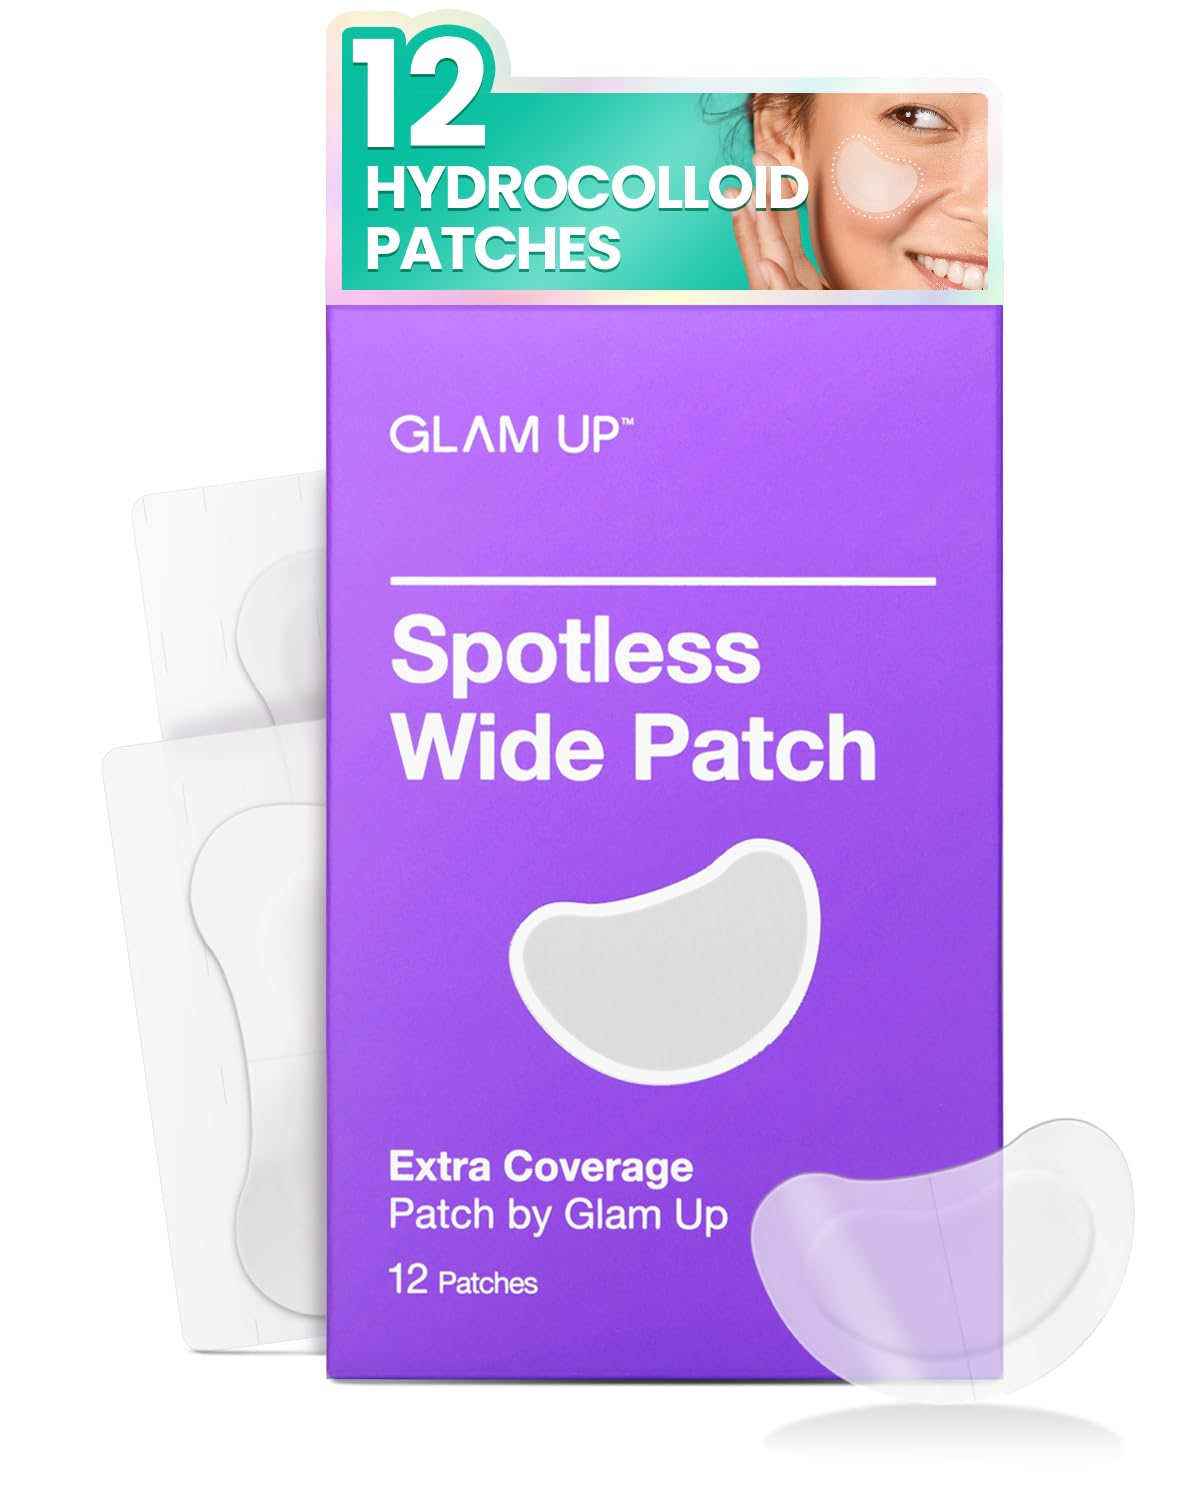 GLAM UP Spotless Patch - Hydrocolloid Spot Patch for Wide Acne area, Cheek, Body, Blackhead Cruelty Free and Vegan Friendly (12 Count)